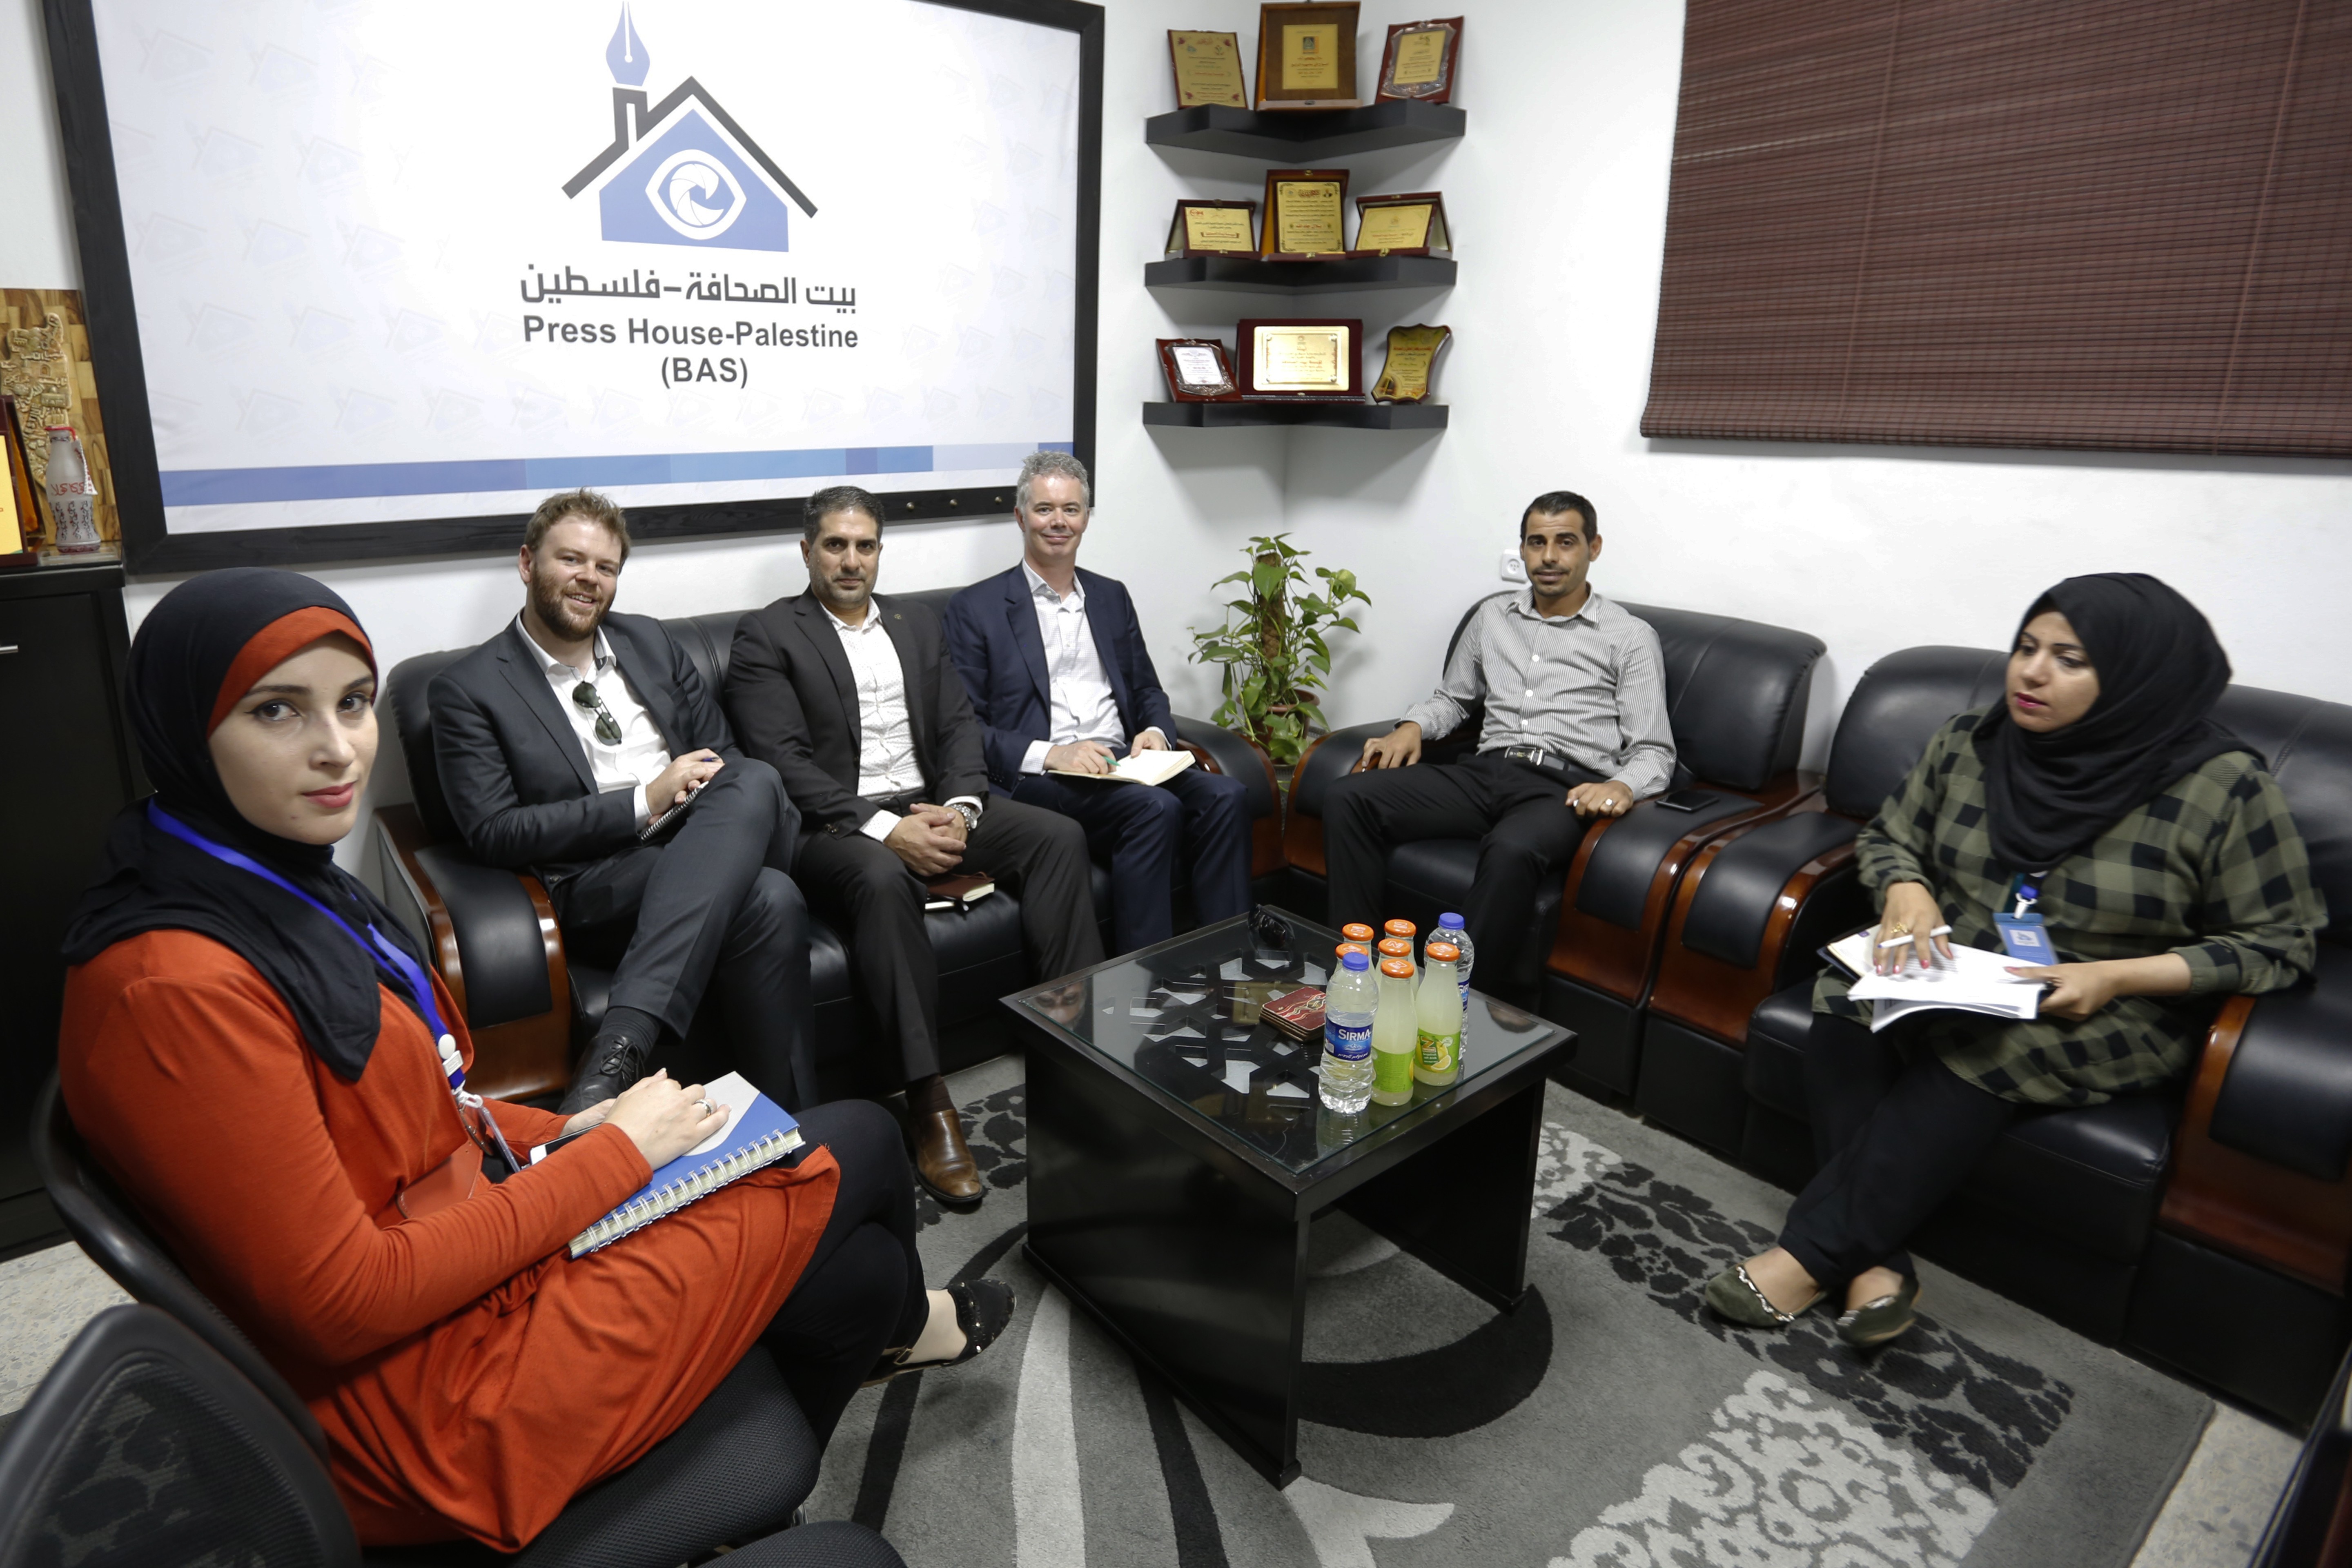 A delegation of the Irish representation in Palestine visits the Press House